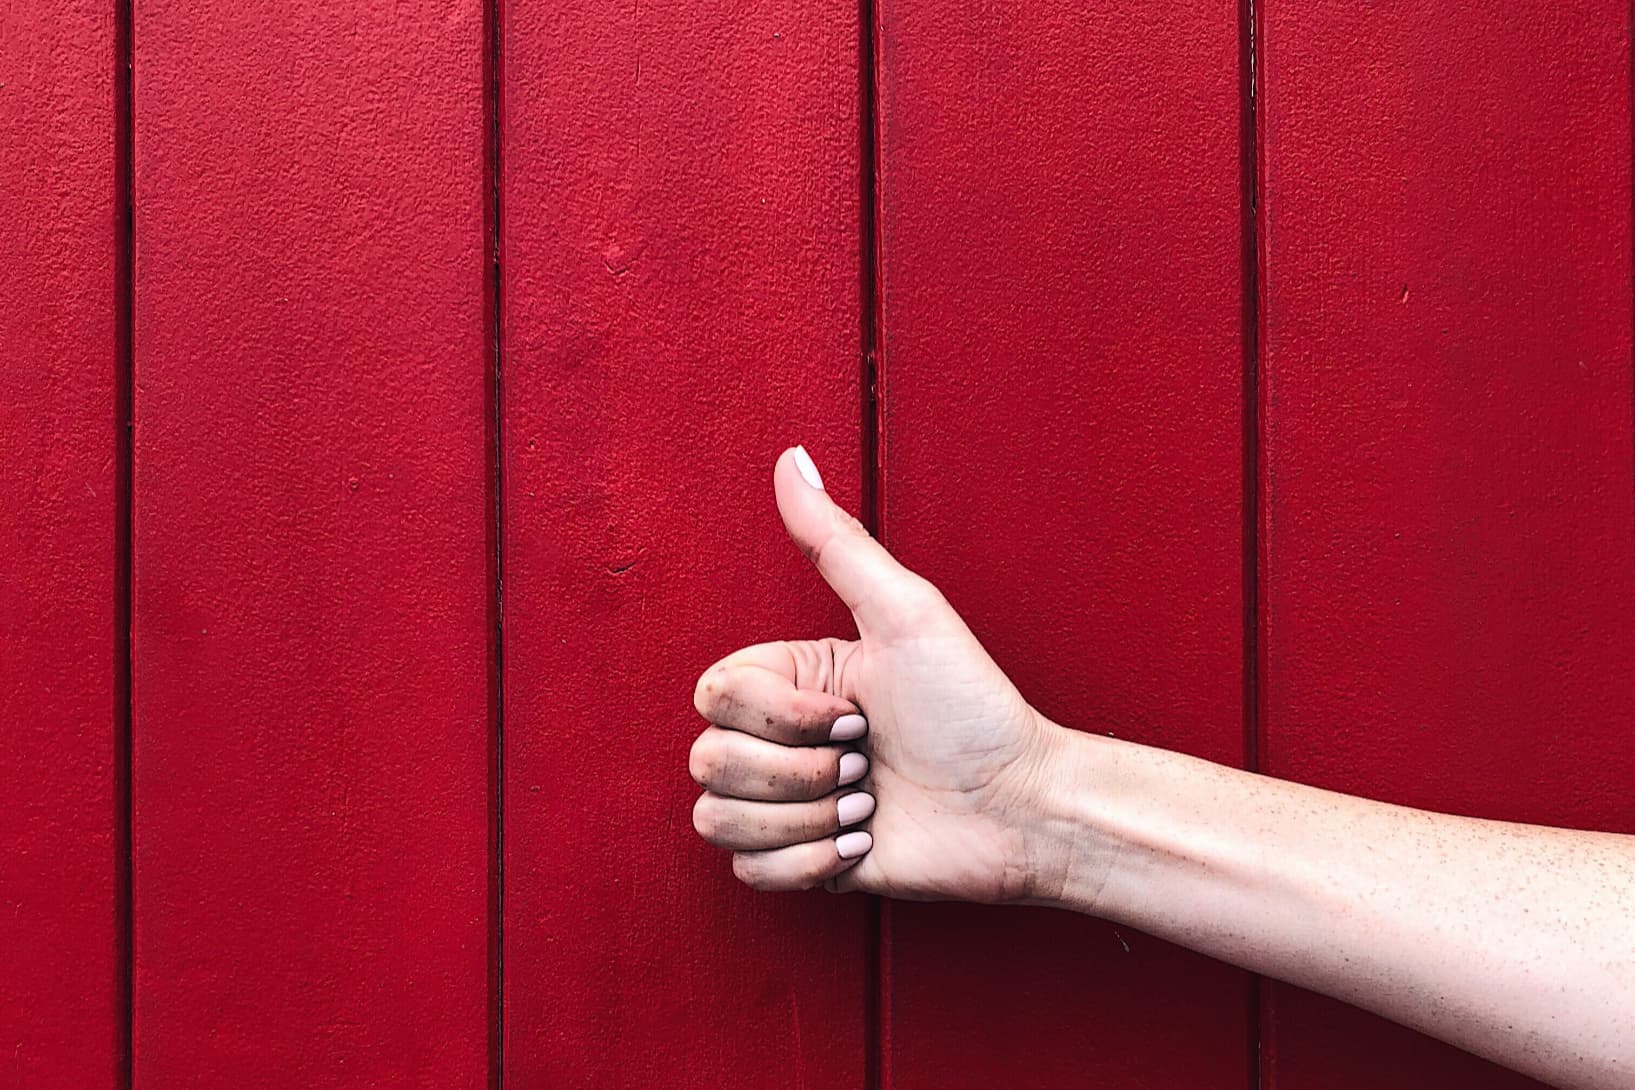 A hand doing a thumbs up in front of a red wall.